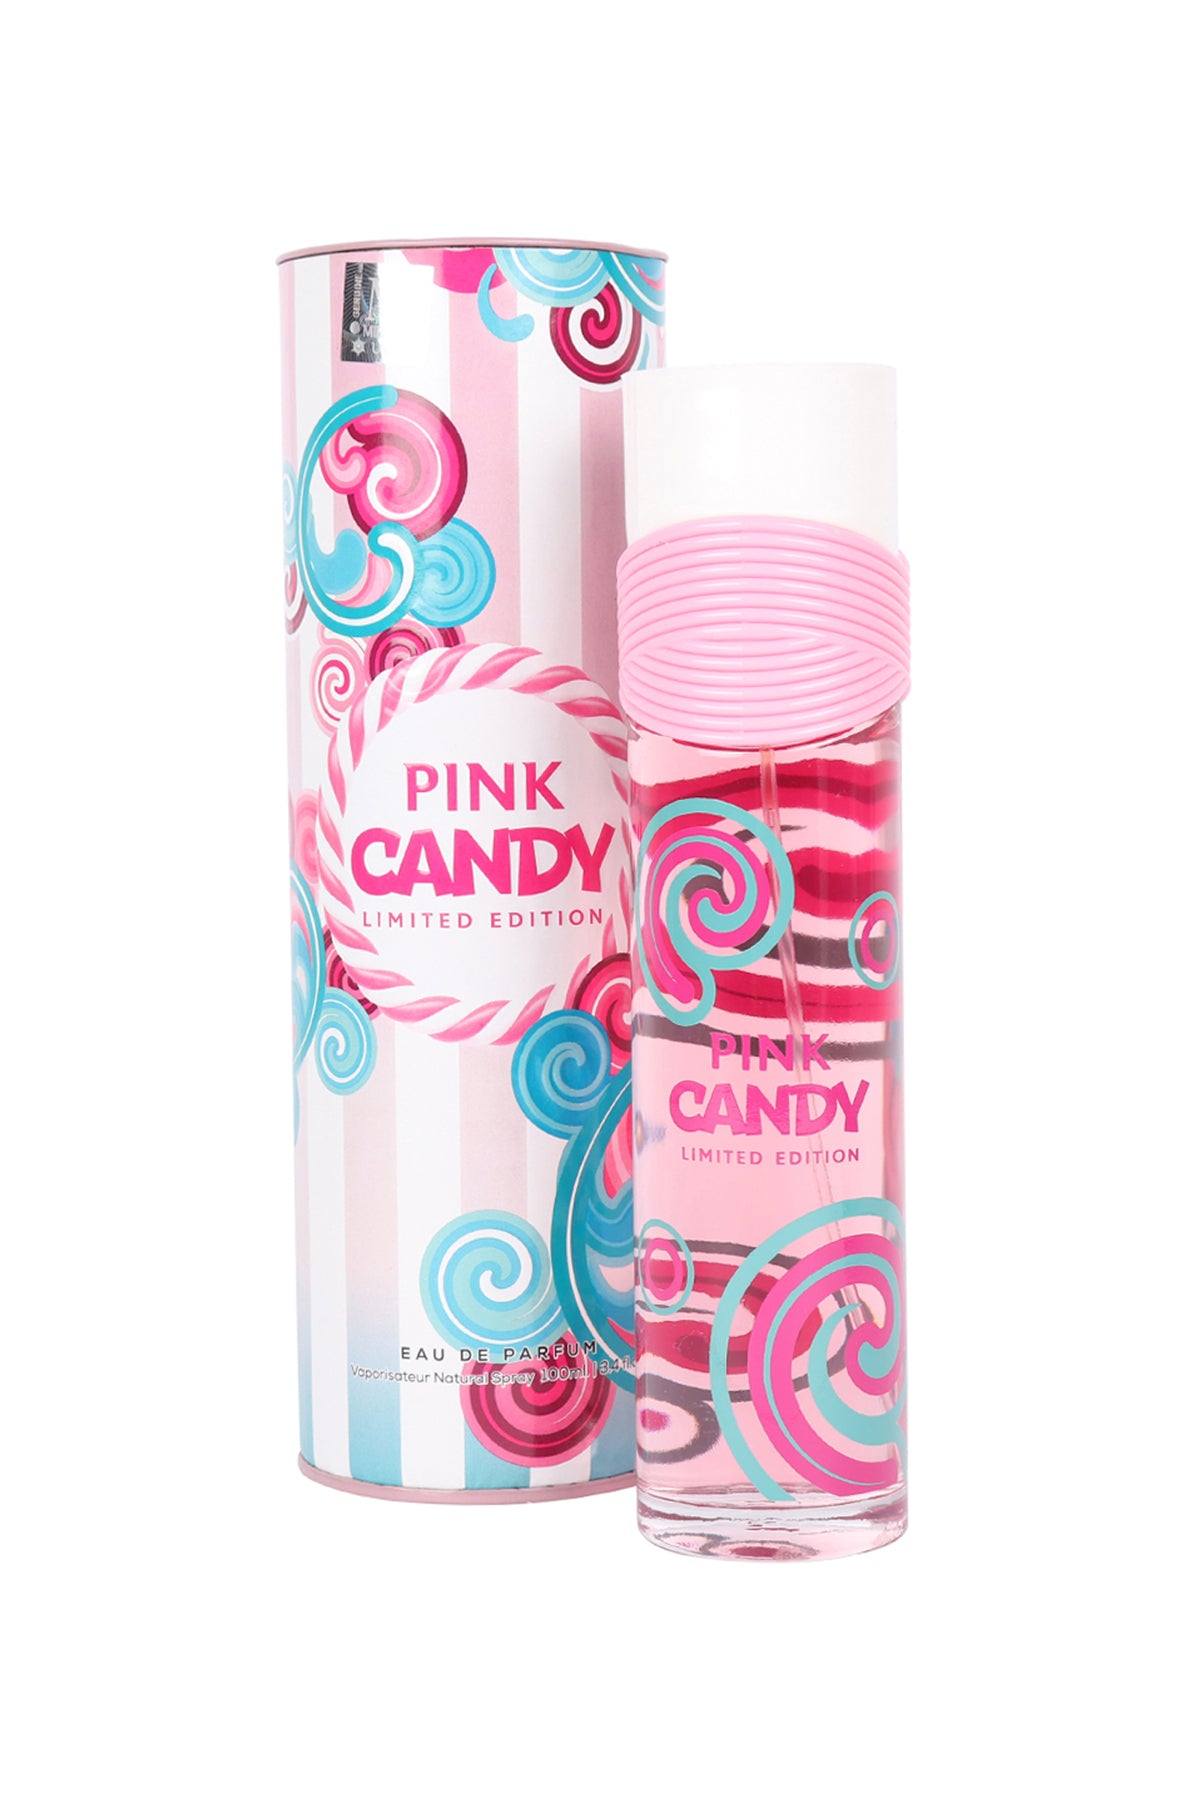 NC-PINK CANDY LIMITED EDITION FOR WOMEN 3.4Z /3PCS